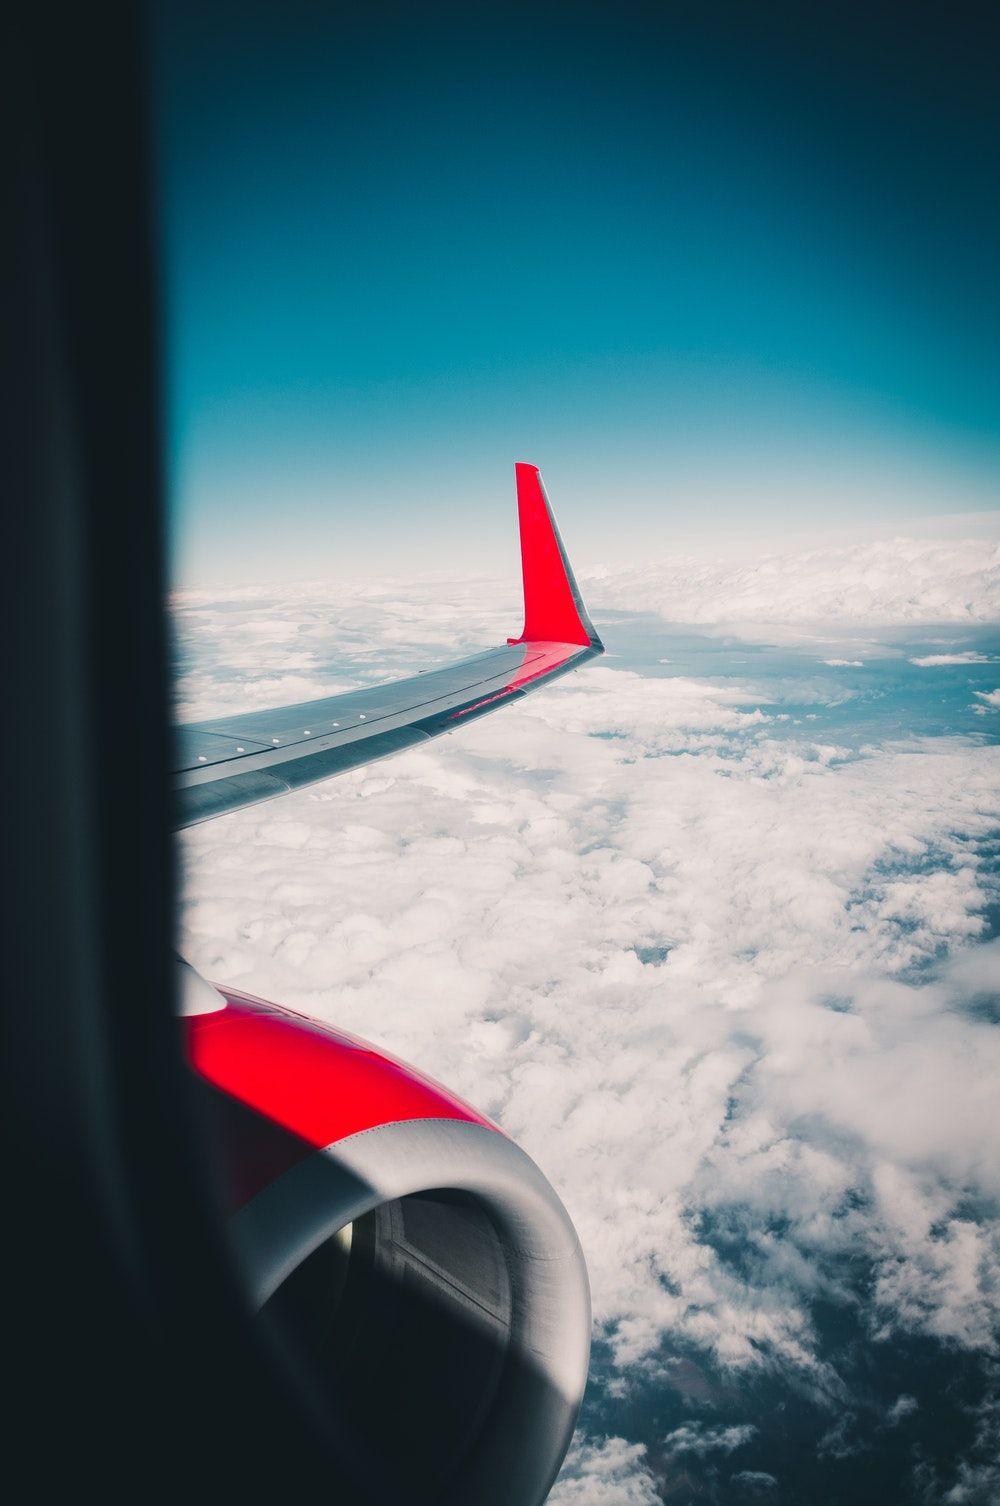 Blue and Red Plane Logo - Plane wing, flight, wanderlust and airplane HD photo